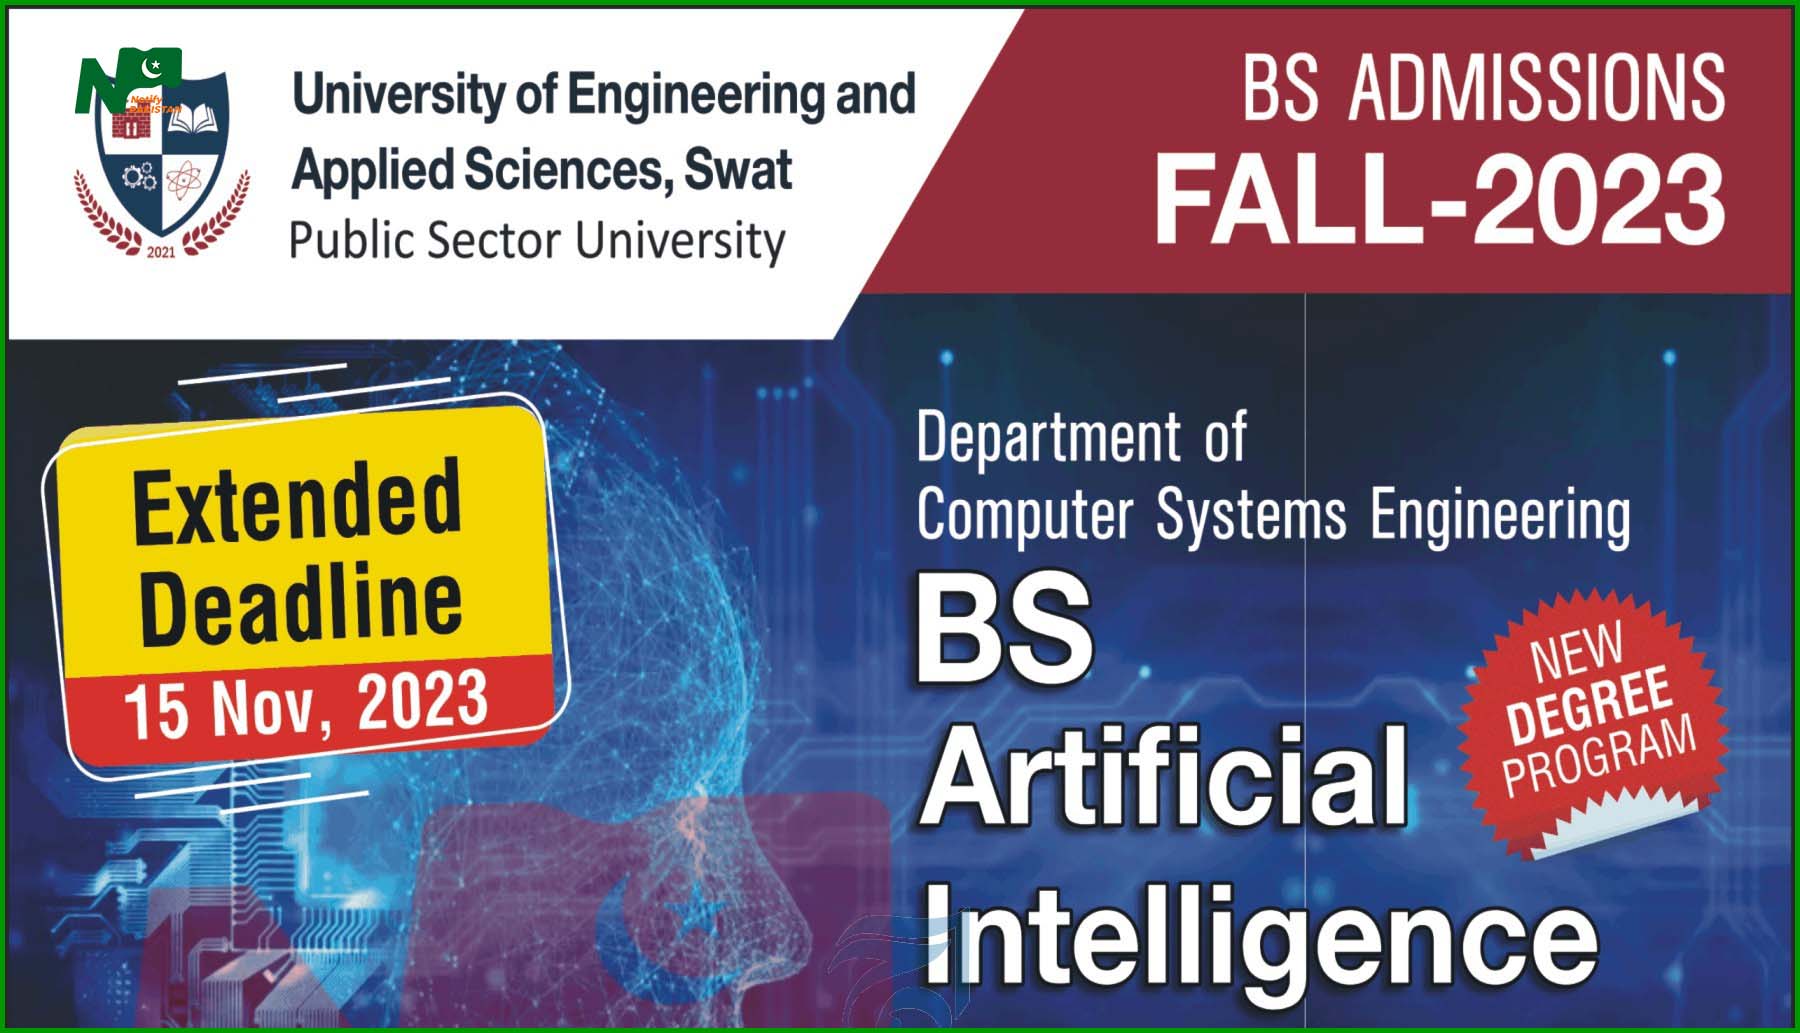 University Of Engineering And Applied Sciences Swat (UEAS) Admission Fall 2023